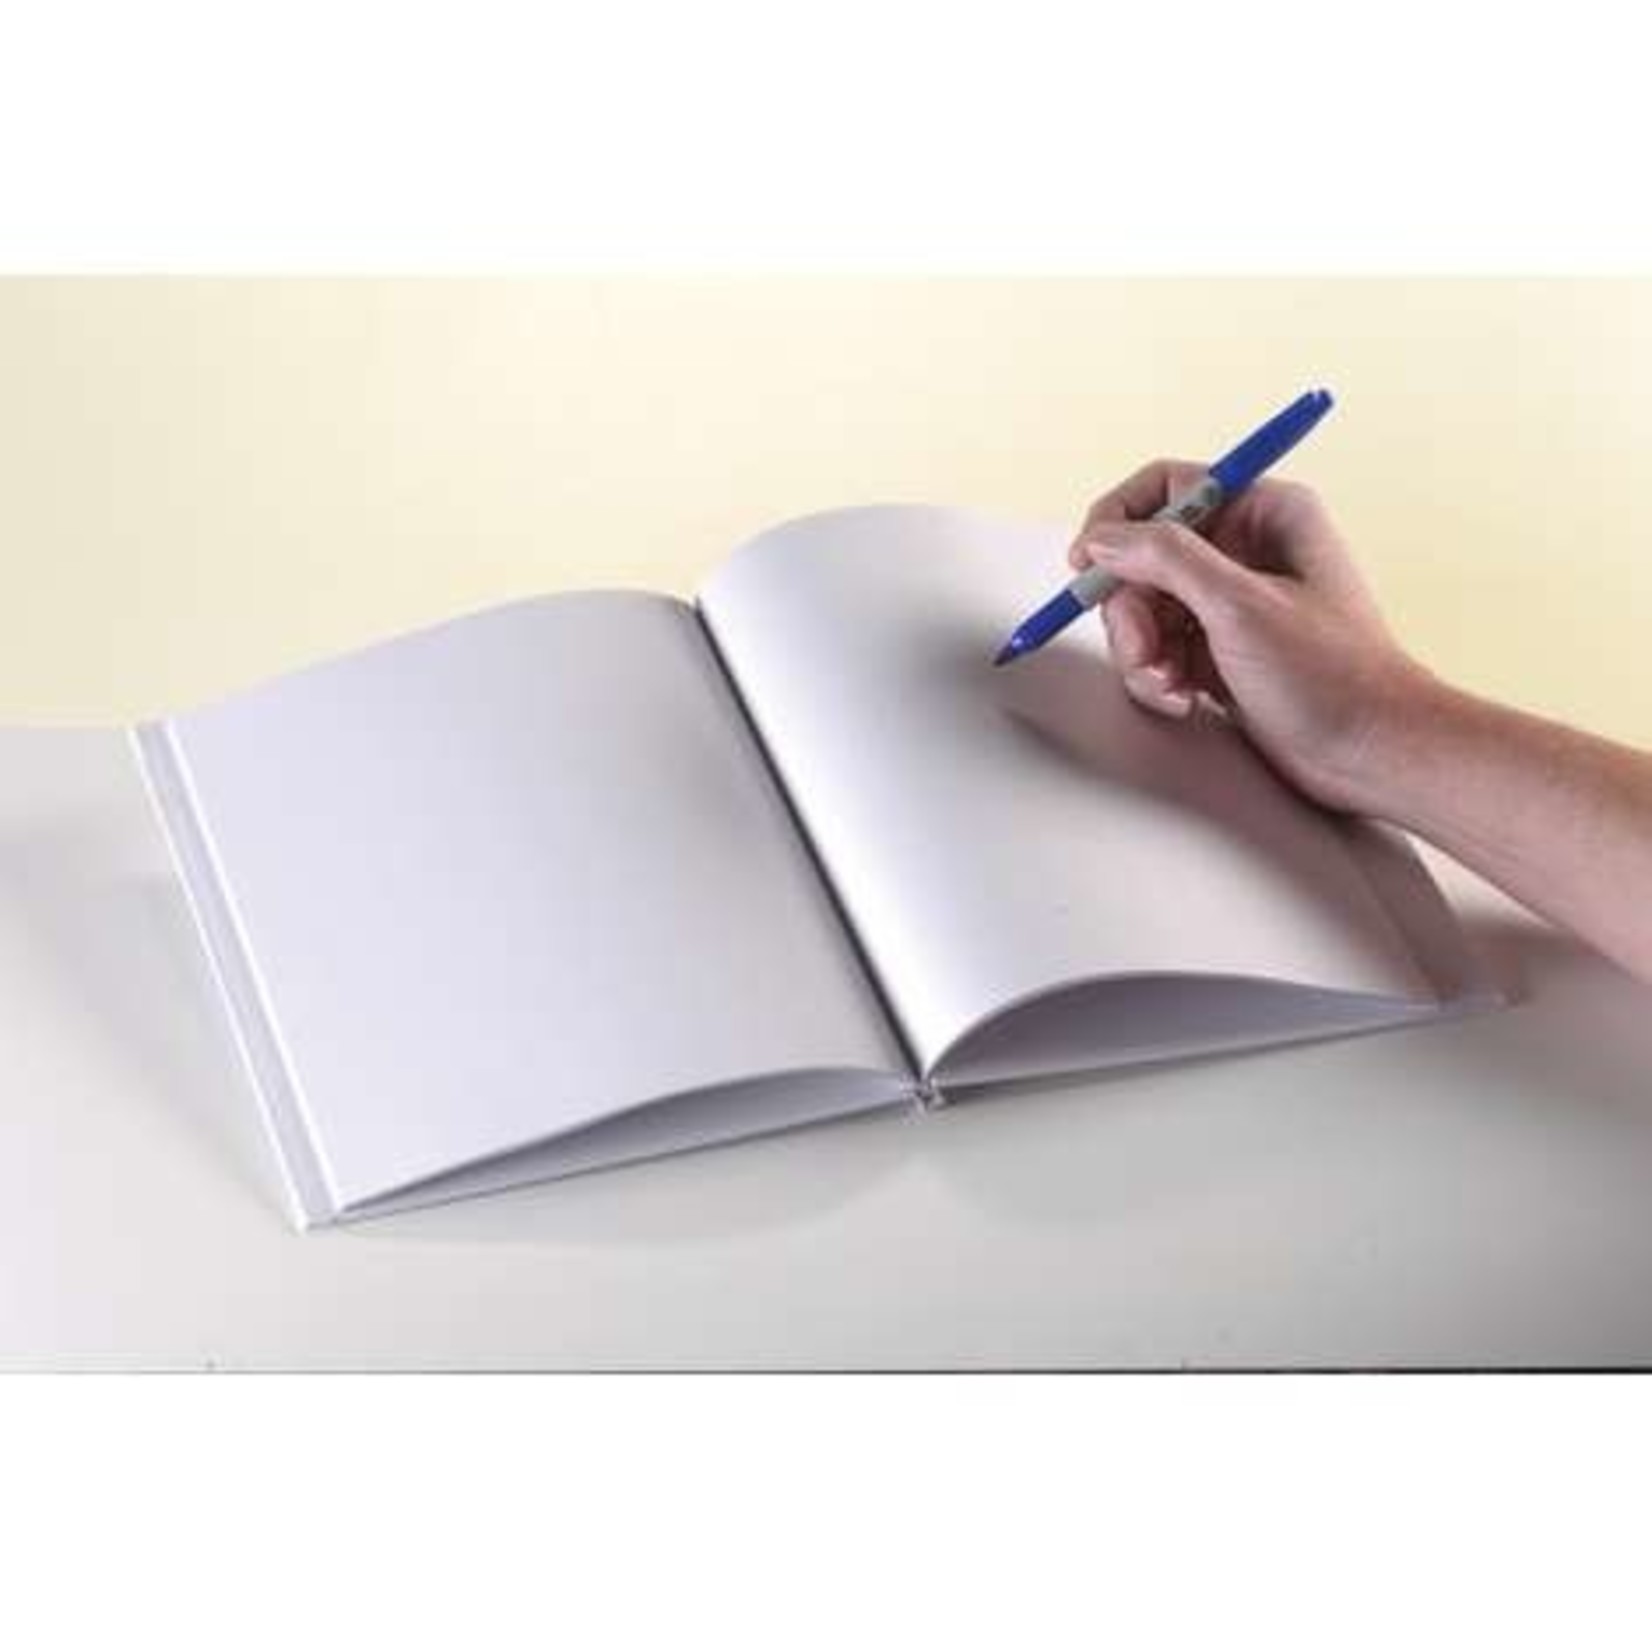 ASHLEY INCORPORATED Blank Hardcover Book, Portrait 8.5"x11"